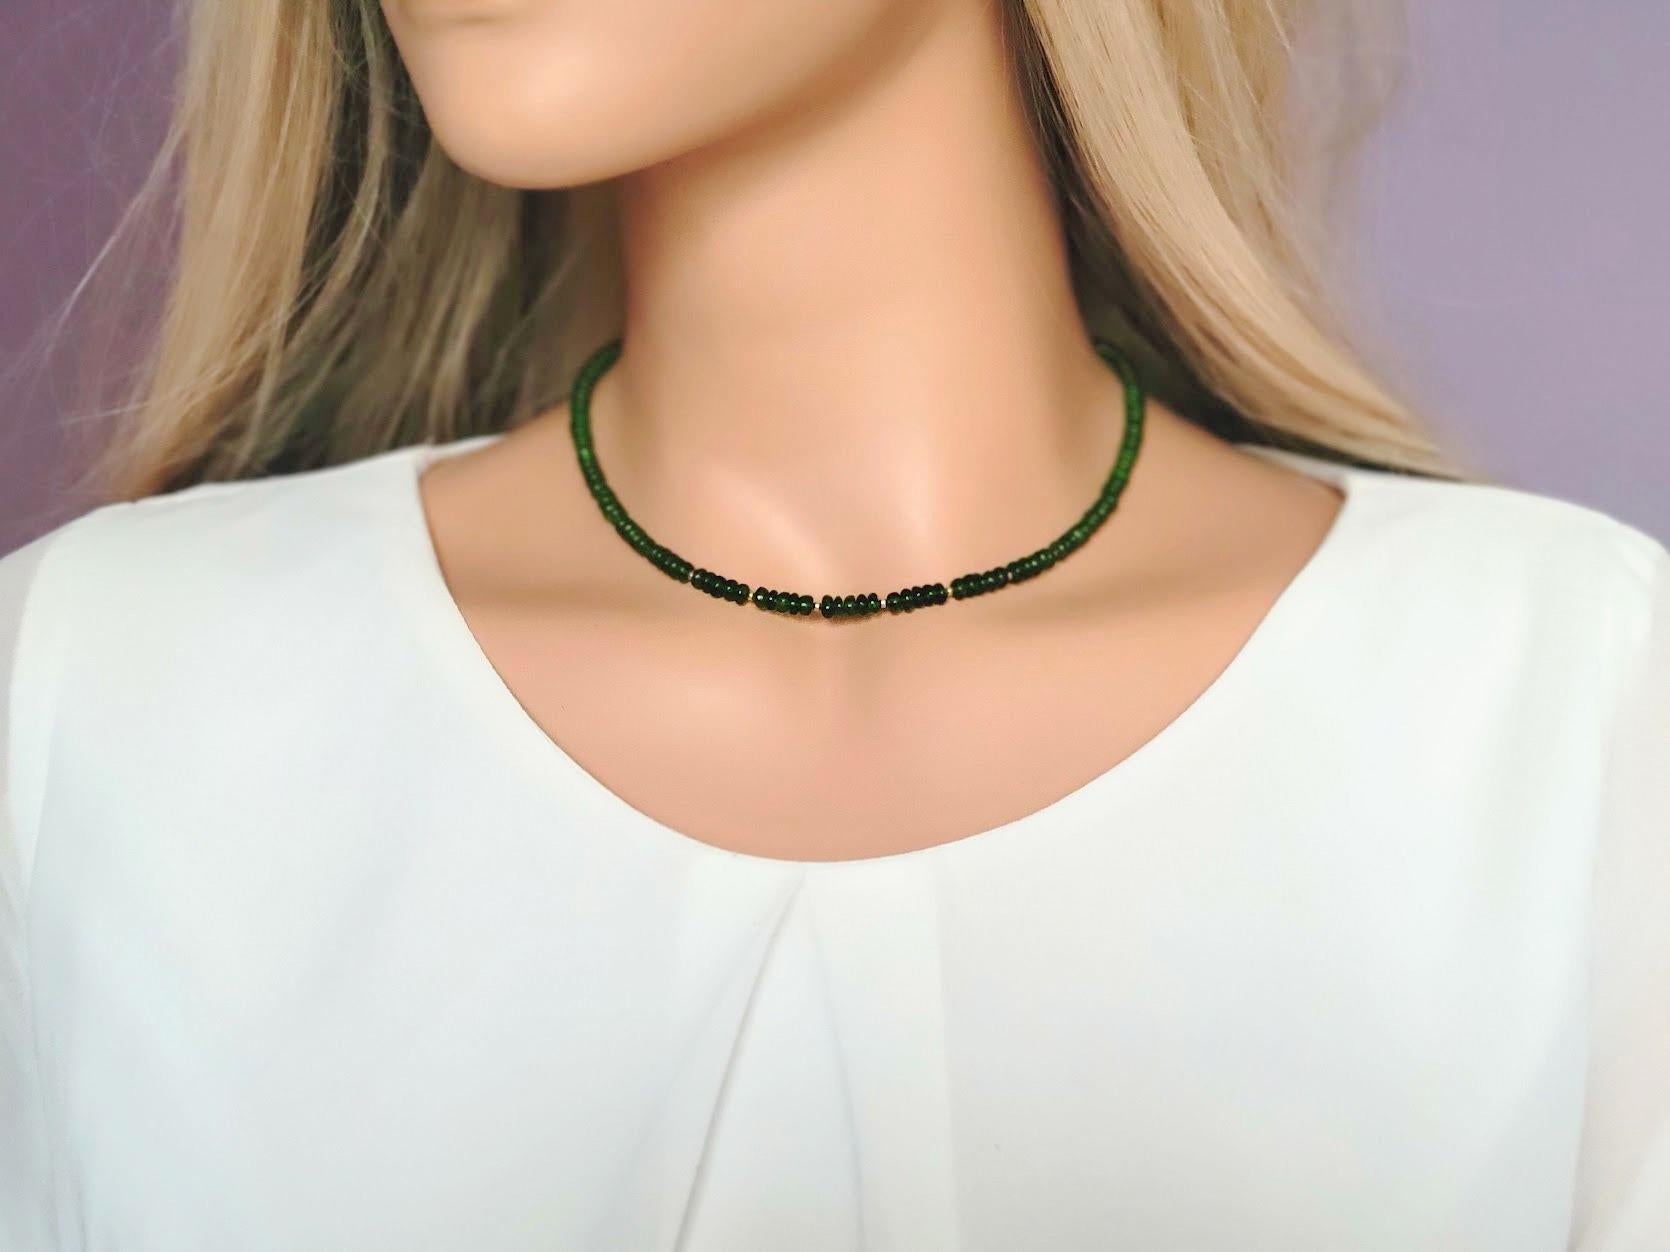 Vintage Tsavorite Choker Necklace In Excellent Condition For Sale In Chesterland, OH